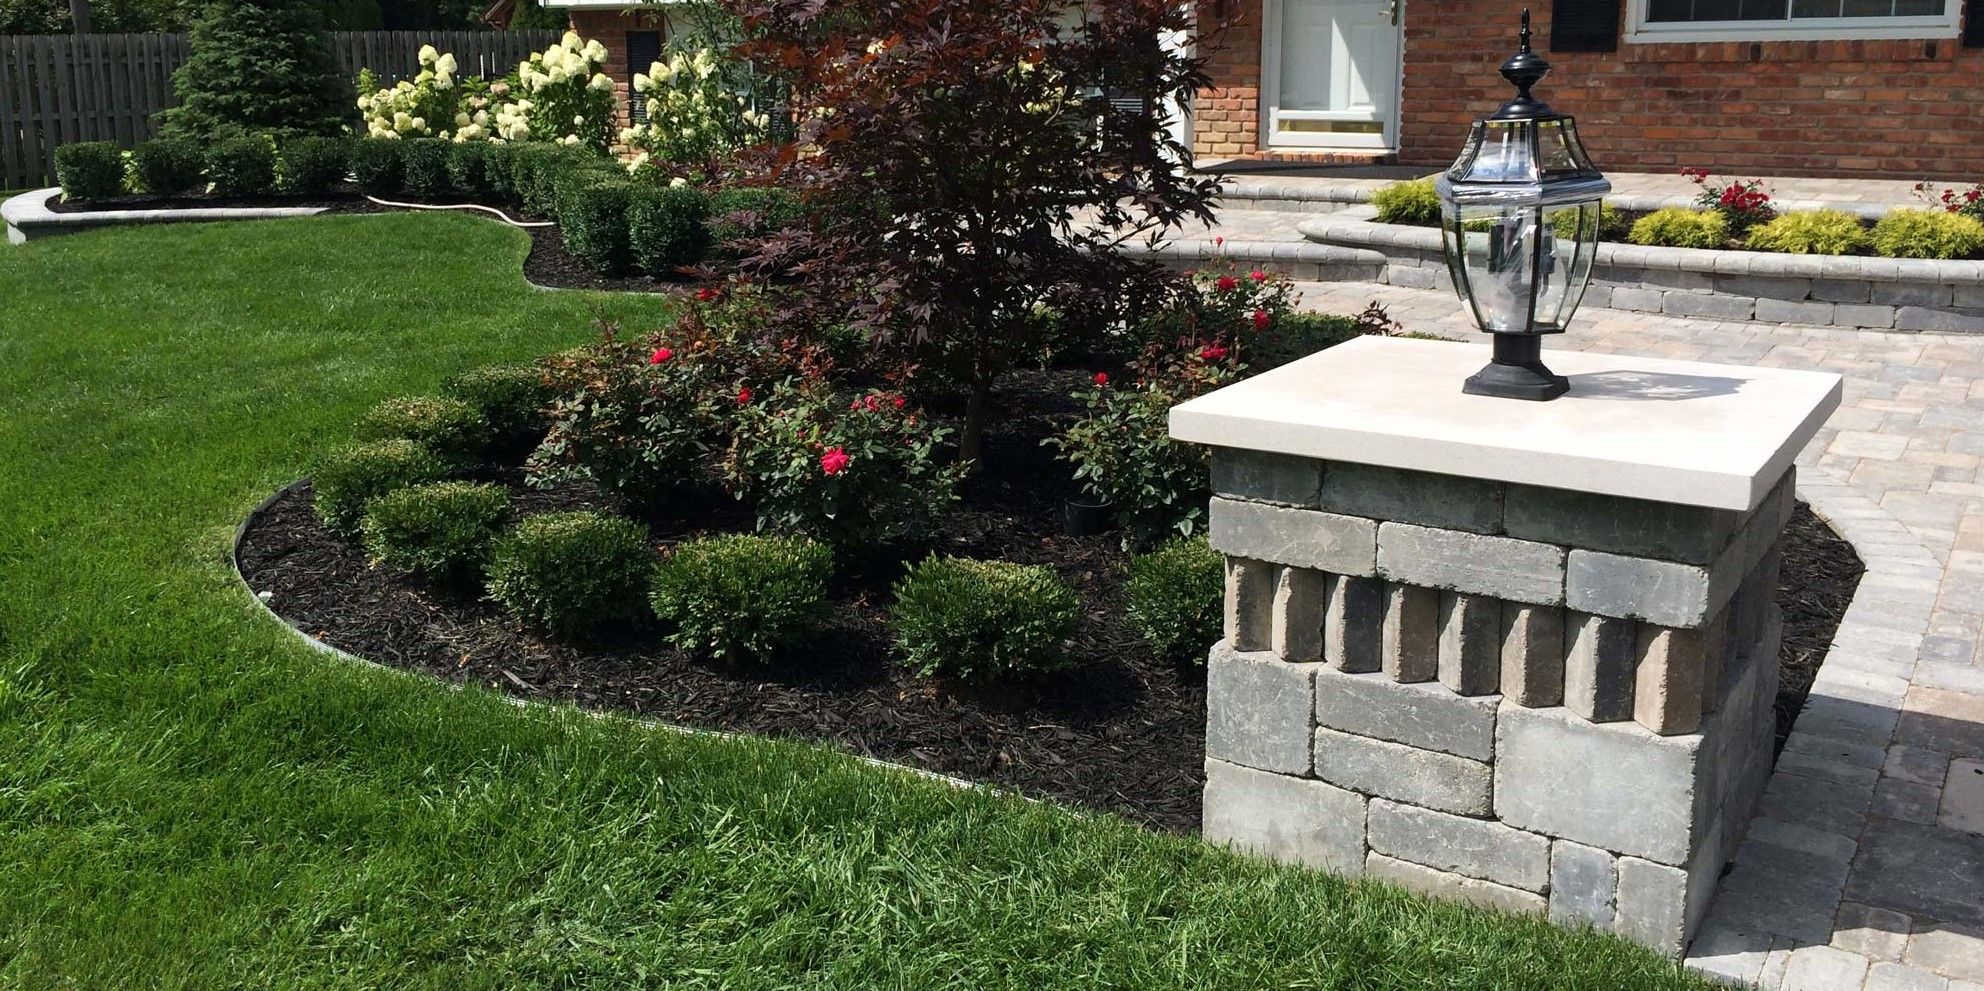 Brick pillar with lamp, paver walkway, and flower bed.